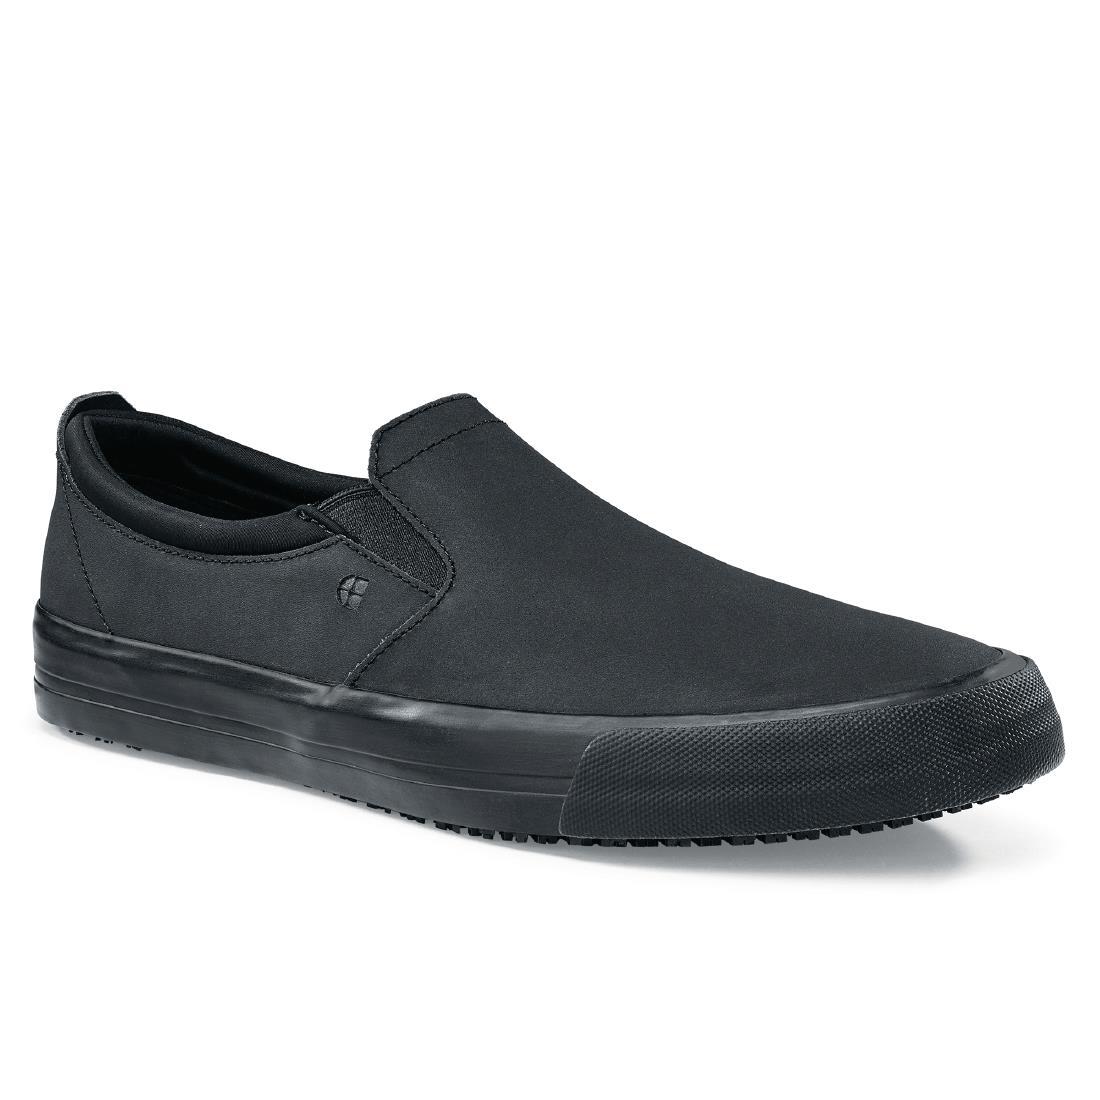 Shoes for Crews Leather Slip On Size 42 - BB163-42  - 1